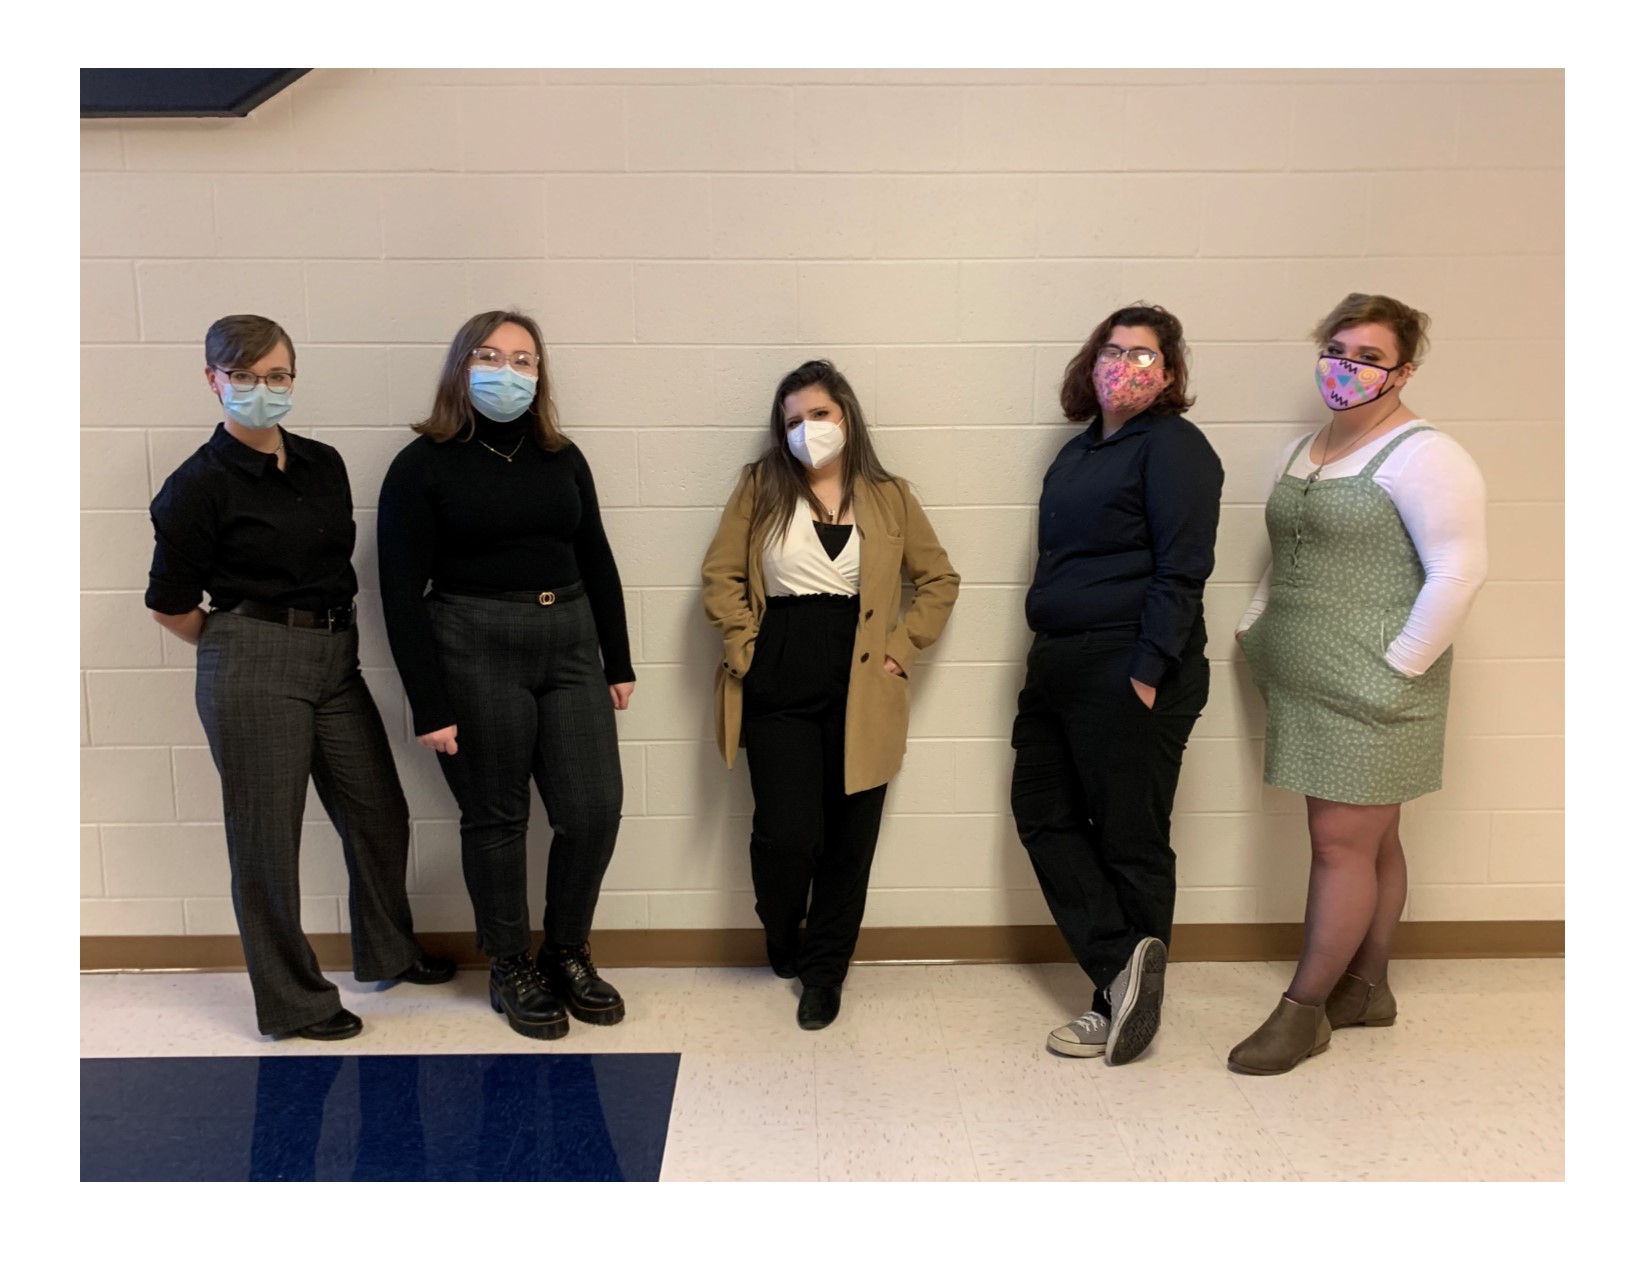 5 students standing against a white wall in business casual wearing masks